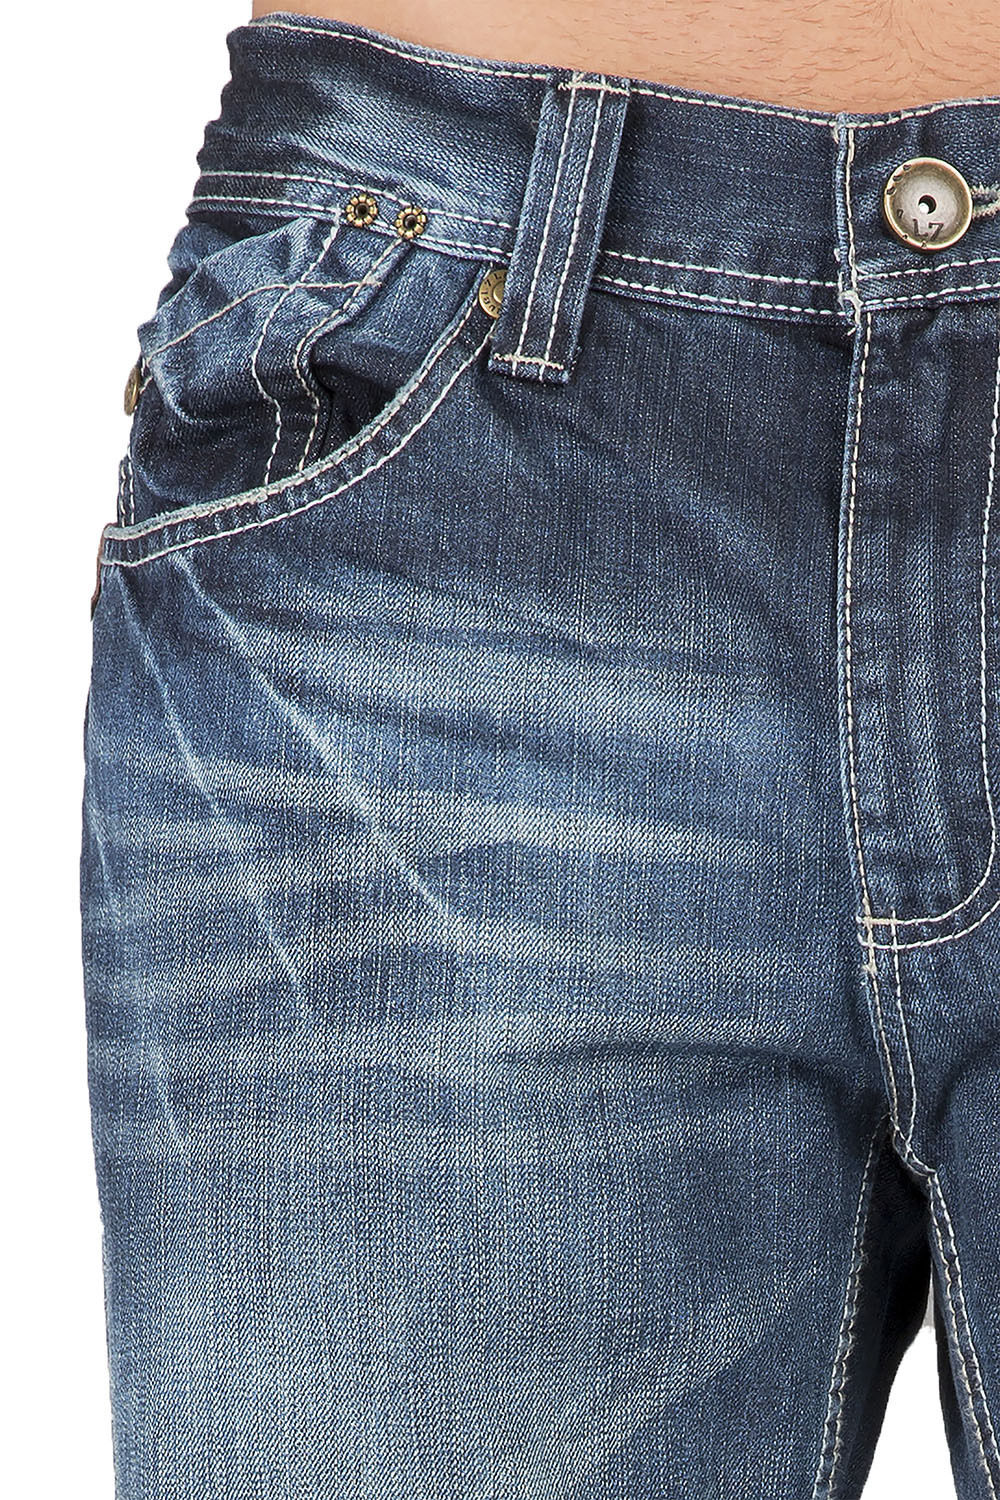 Buckeroo Relaxed Straight Premium Denim signature 5 pocket Jeans Whiskering Scratching